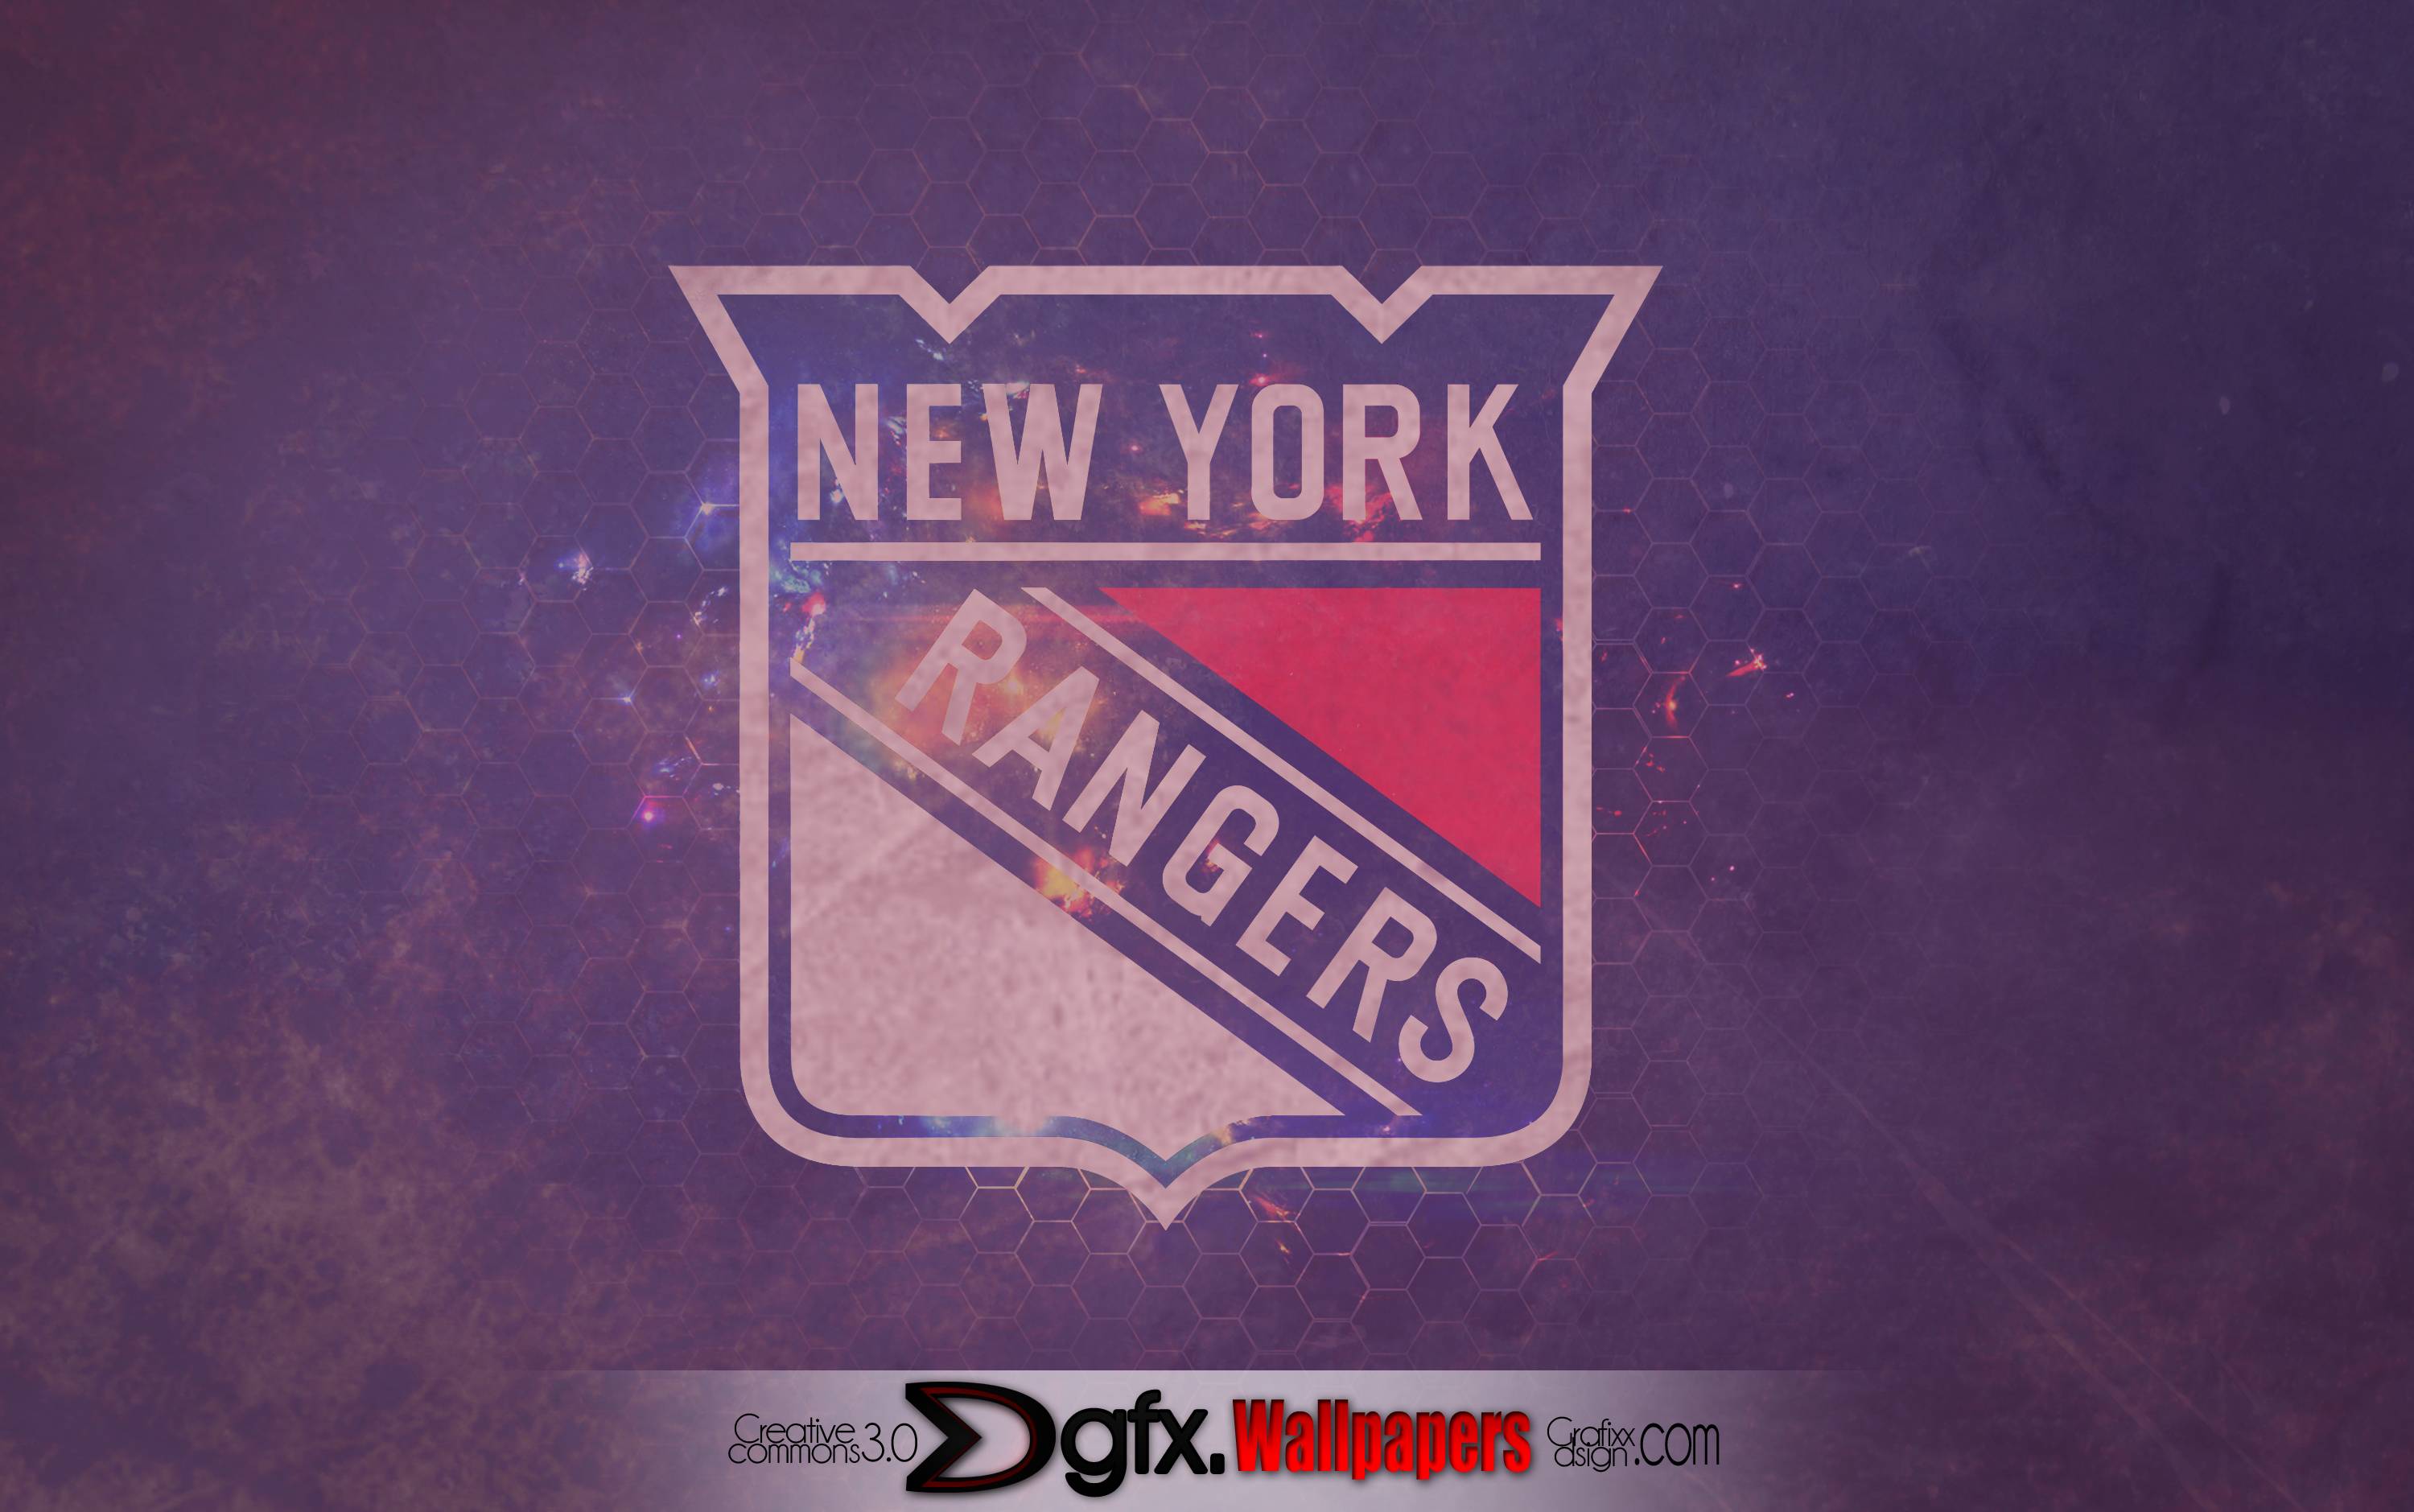 30+ New York Rangers HD Wallpapers and Backgrounds